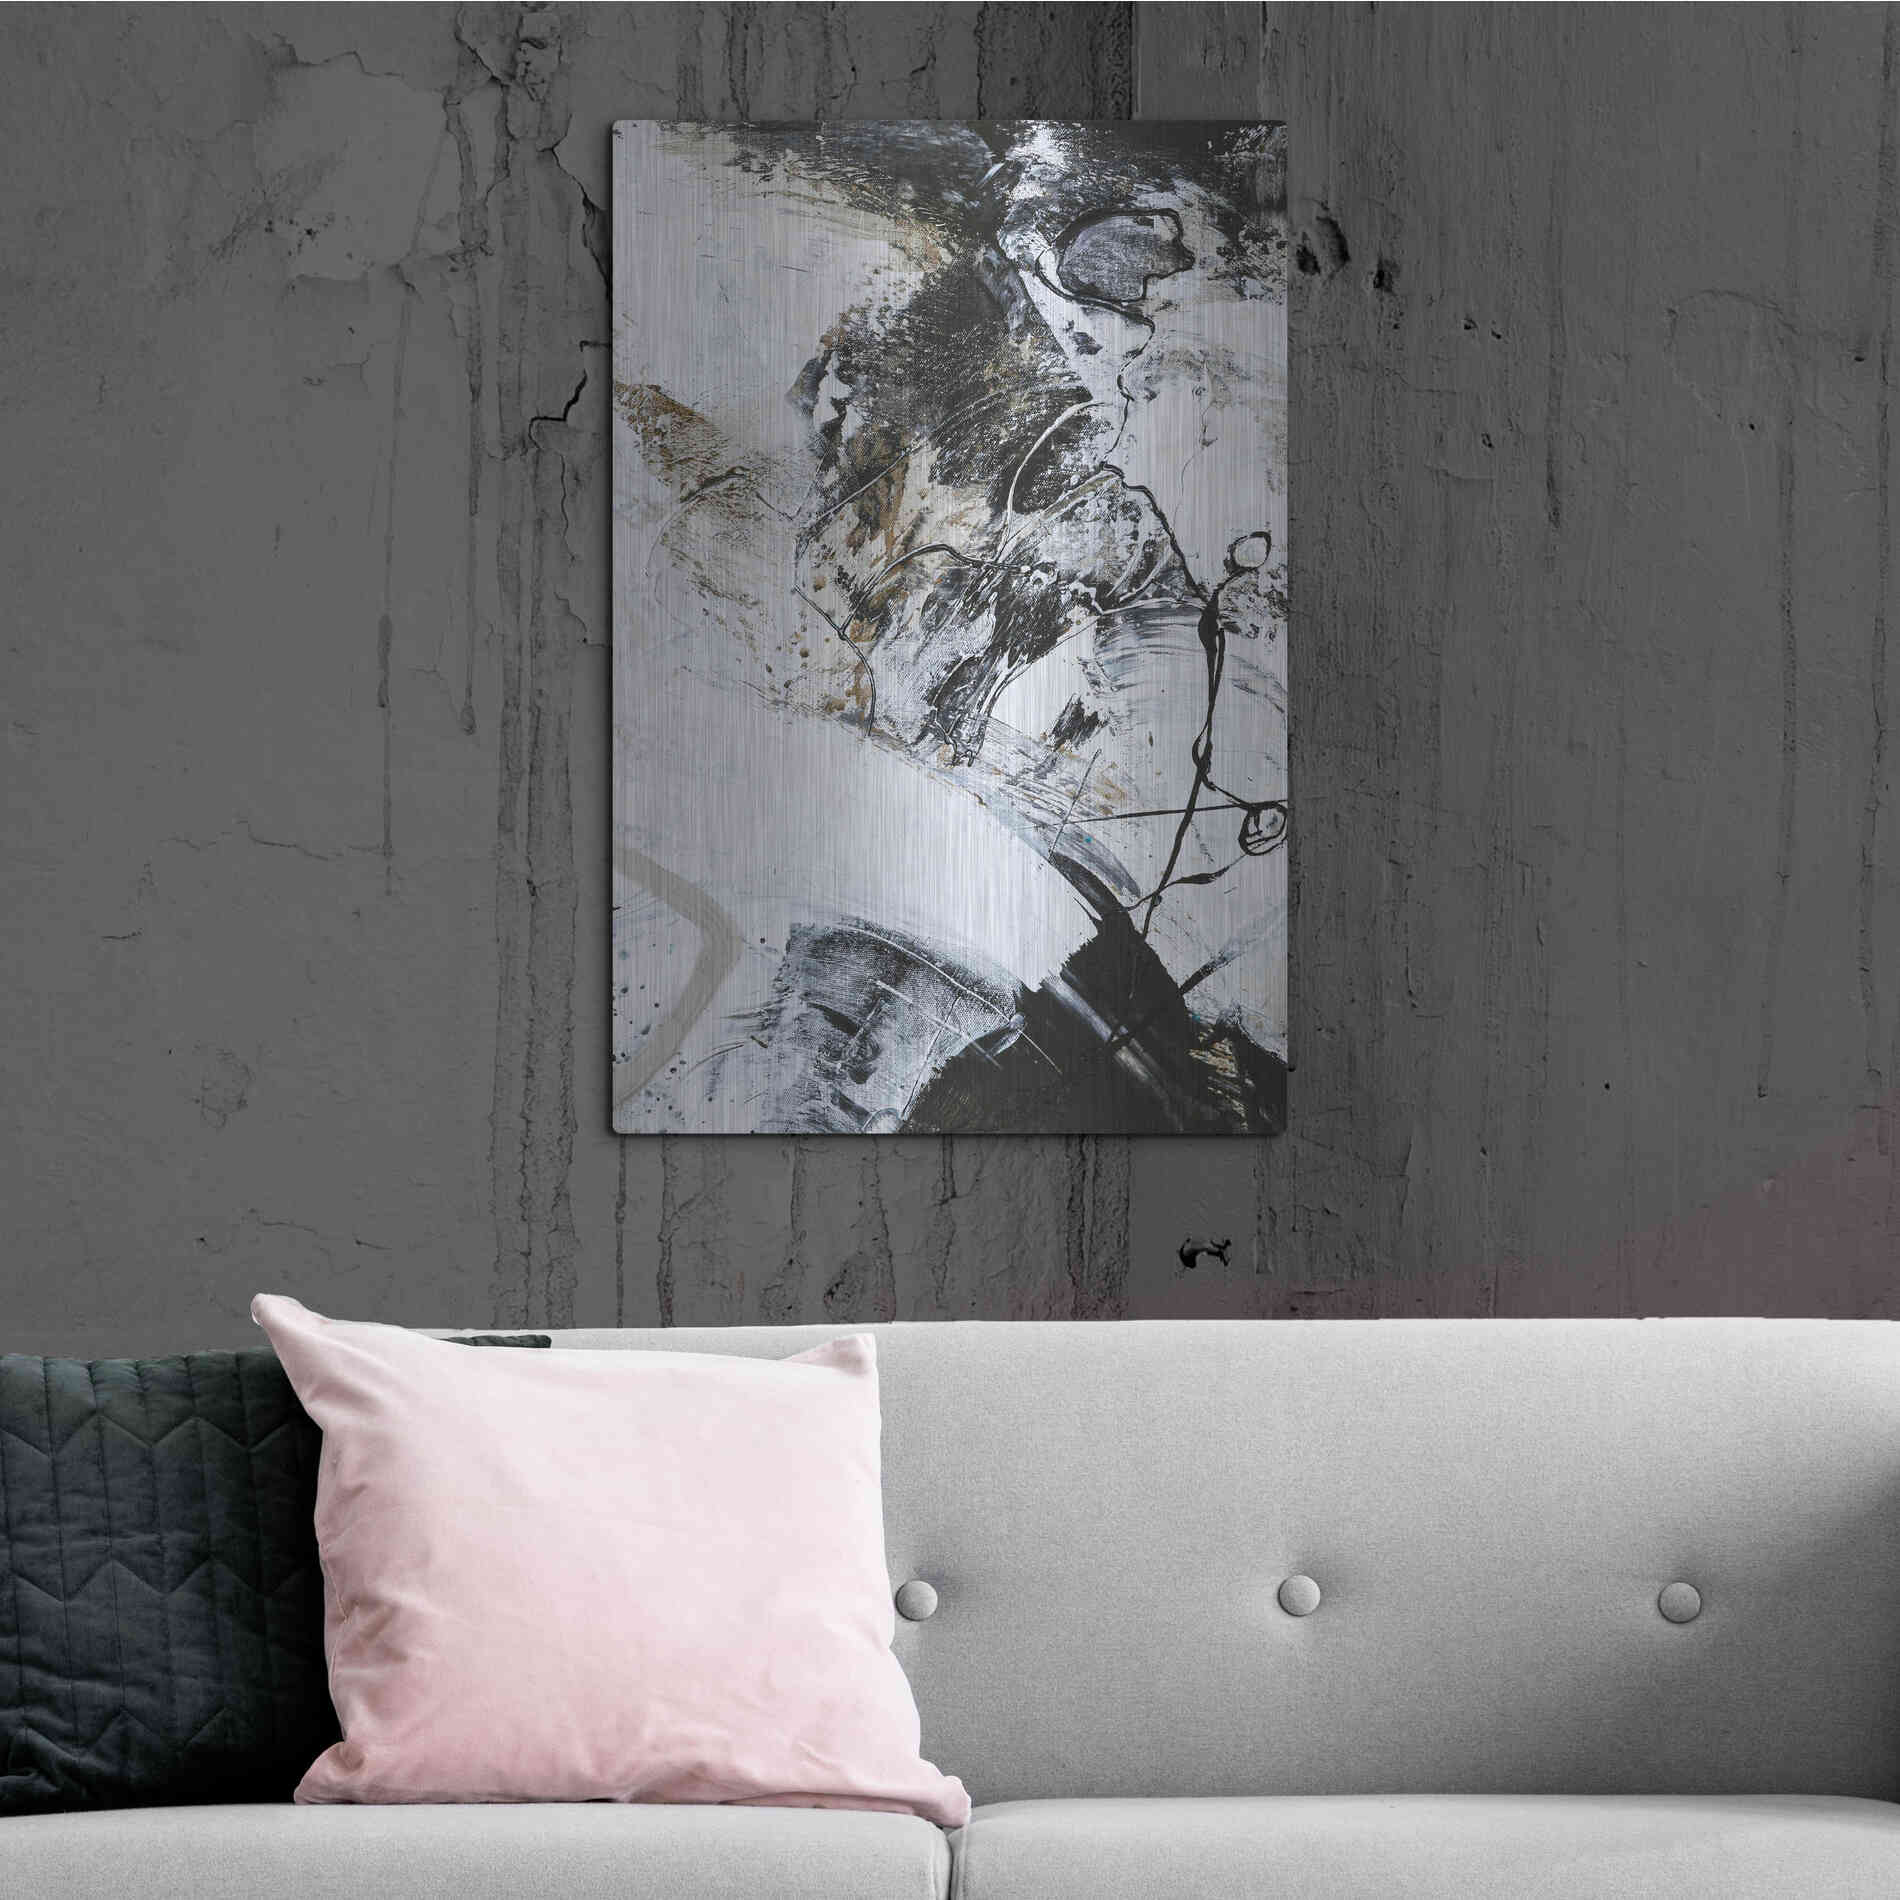 Luxe Metal Art 'Black and White 1' by Design Fabrikken, Metal Wall Art,24x36